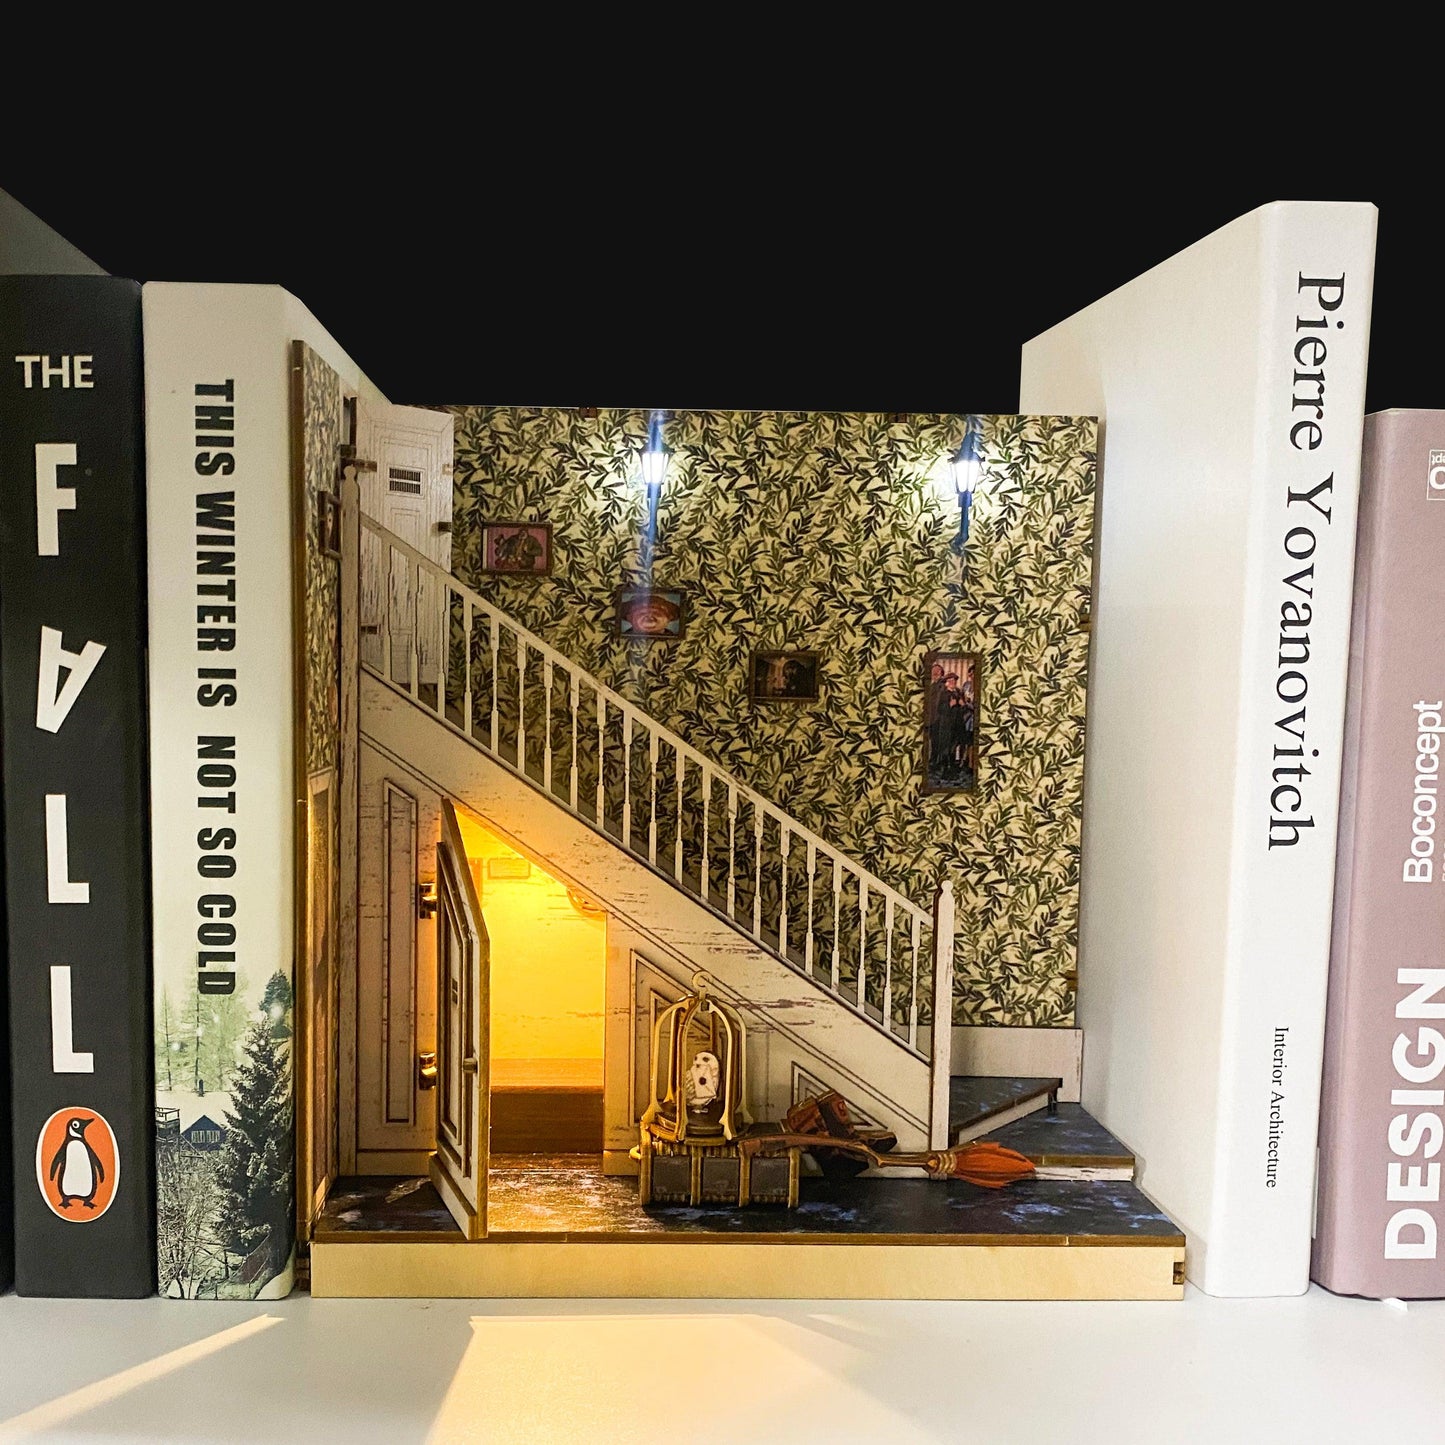 The Cupboard Under Stairs Book Nook - DIY Book Nook Kits - 4 Privet Drive House Book Nook - Dursley's House Book Nook - Dudley Room Book Nook Wizard Alley Book Nooks Magic Alley Book Shelf Insert Book Scenery with LED